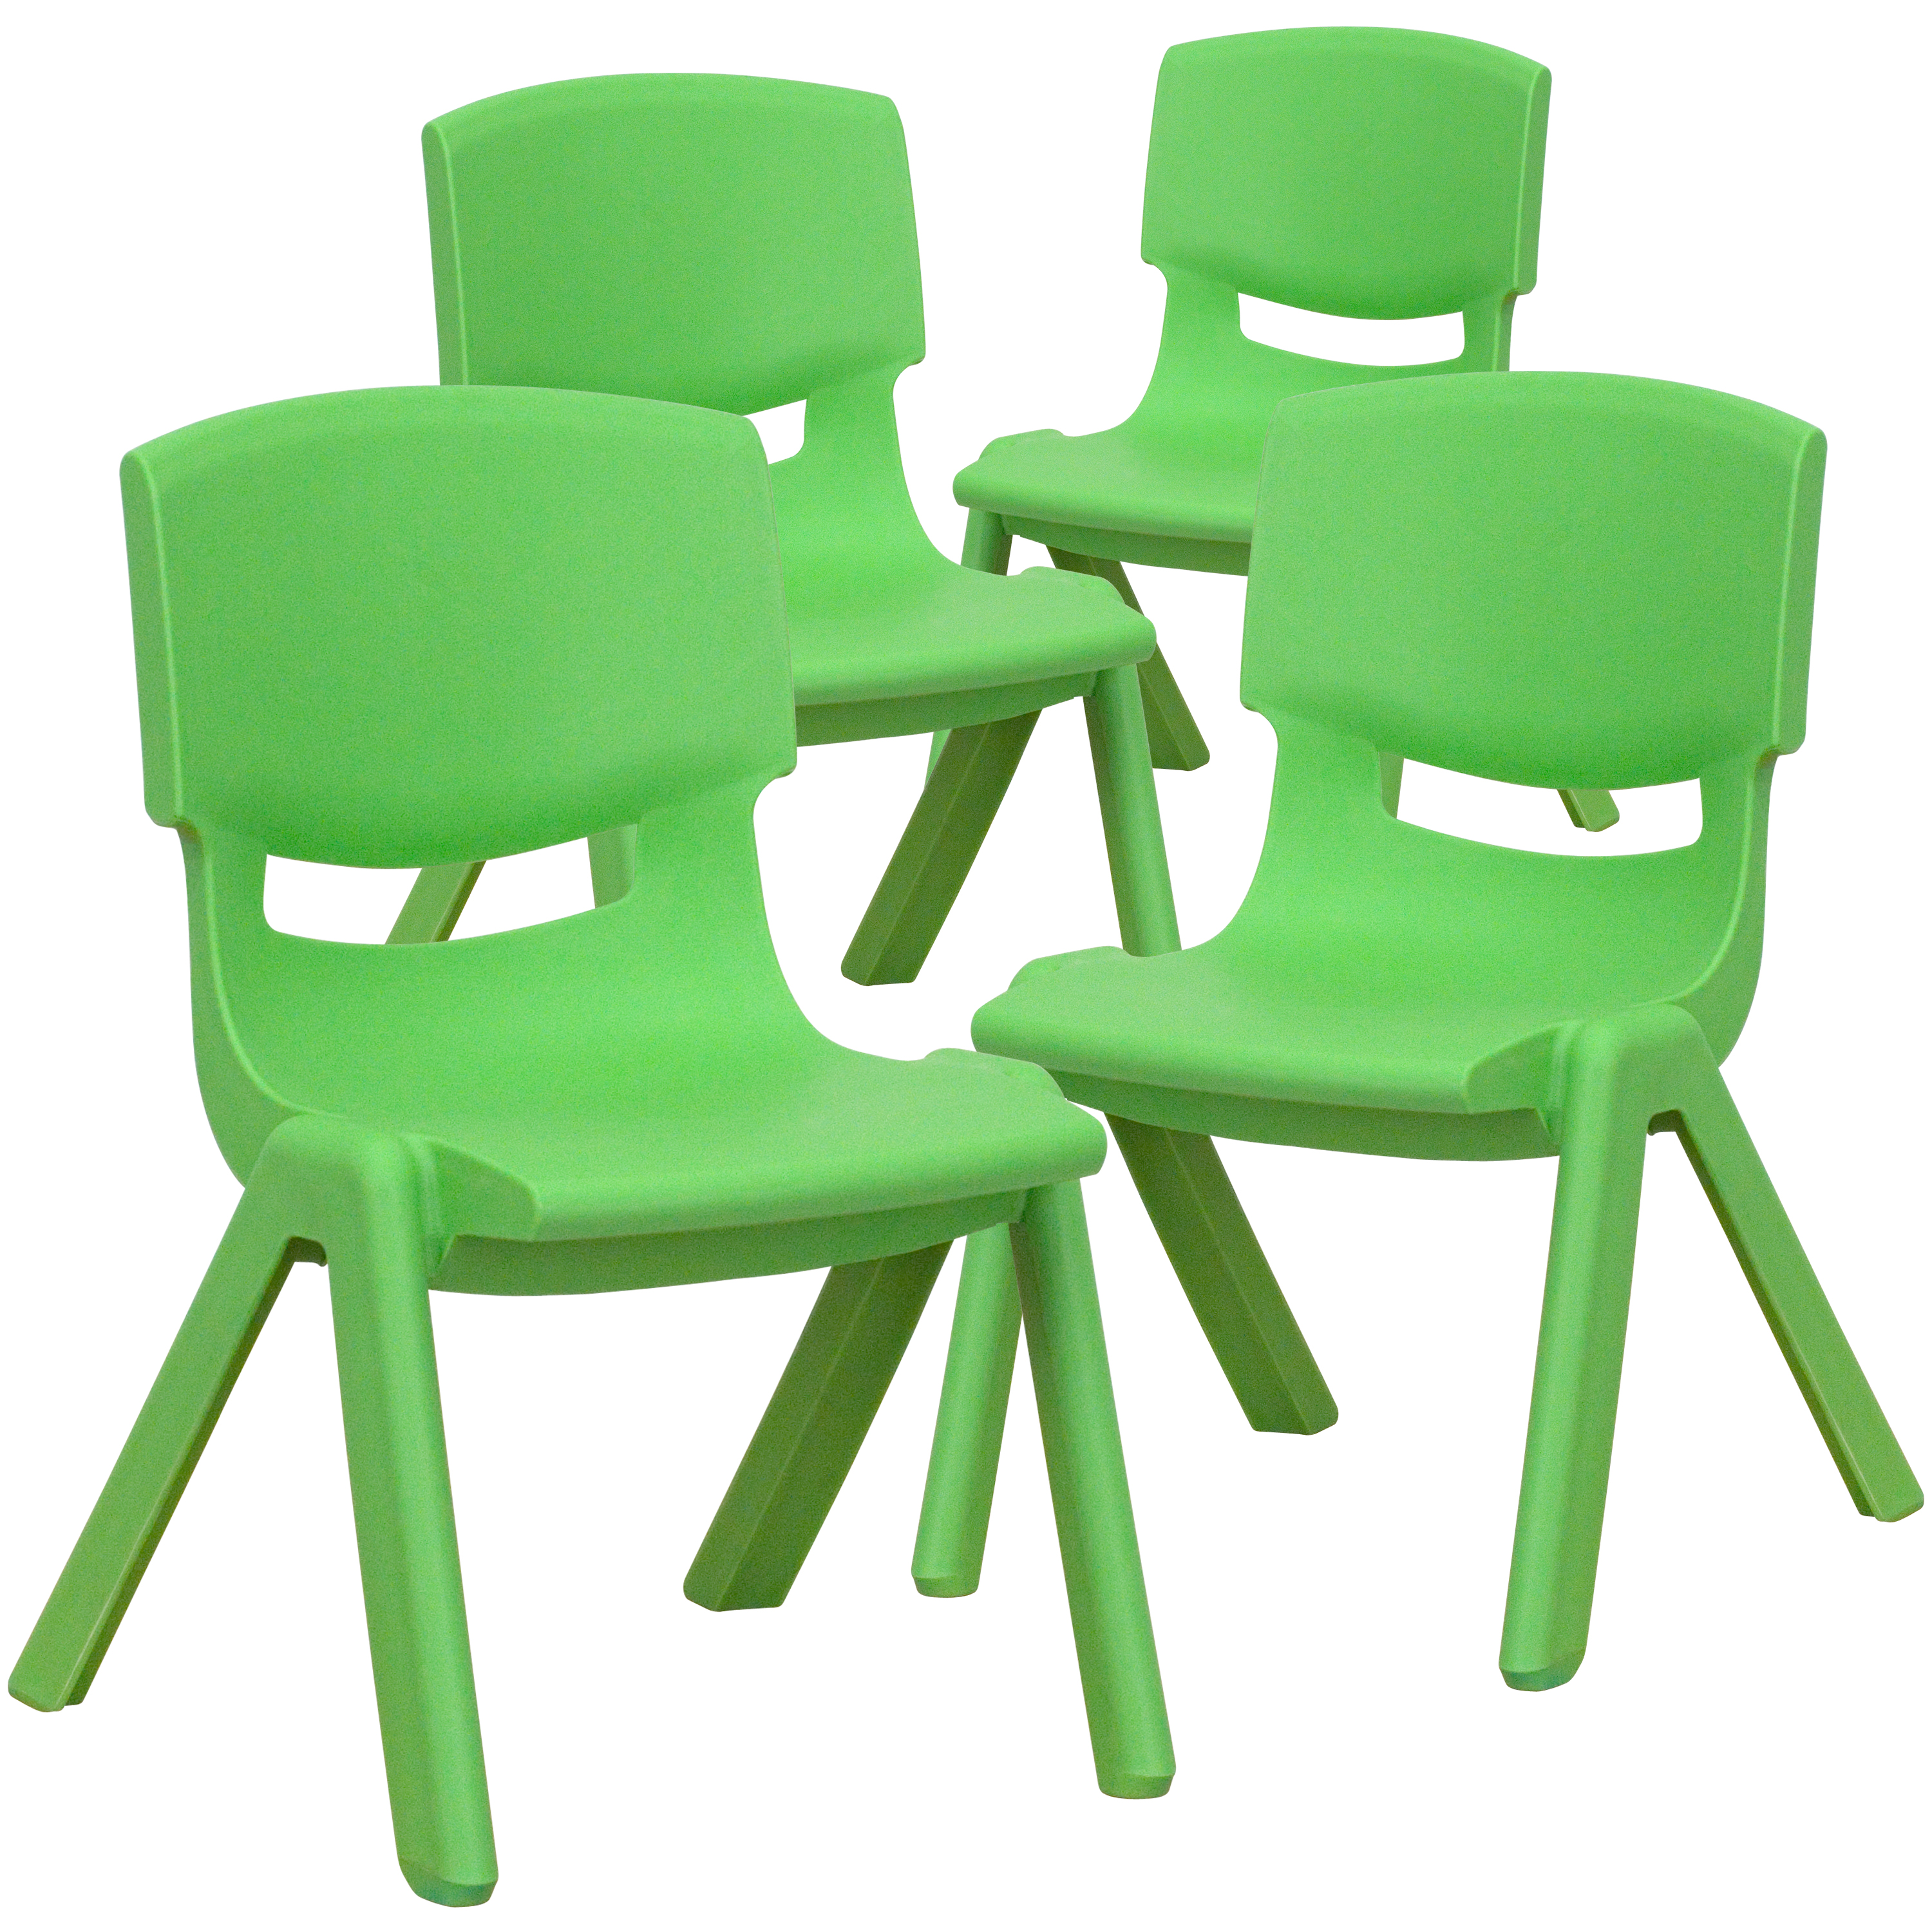 Flash Furniture 4-YU-YCX4-003-GREEN-GG Green Plastic Stackable School Chair with 10.5'' Seat Height, 4 Pack